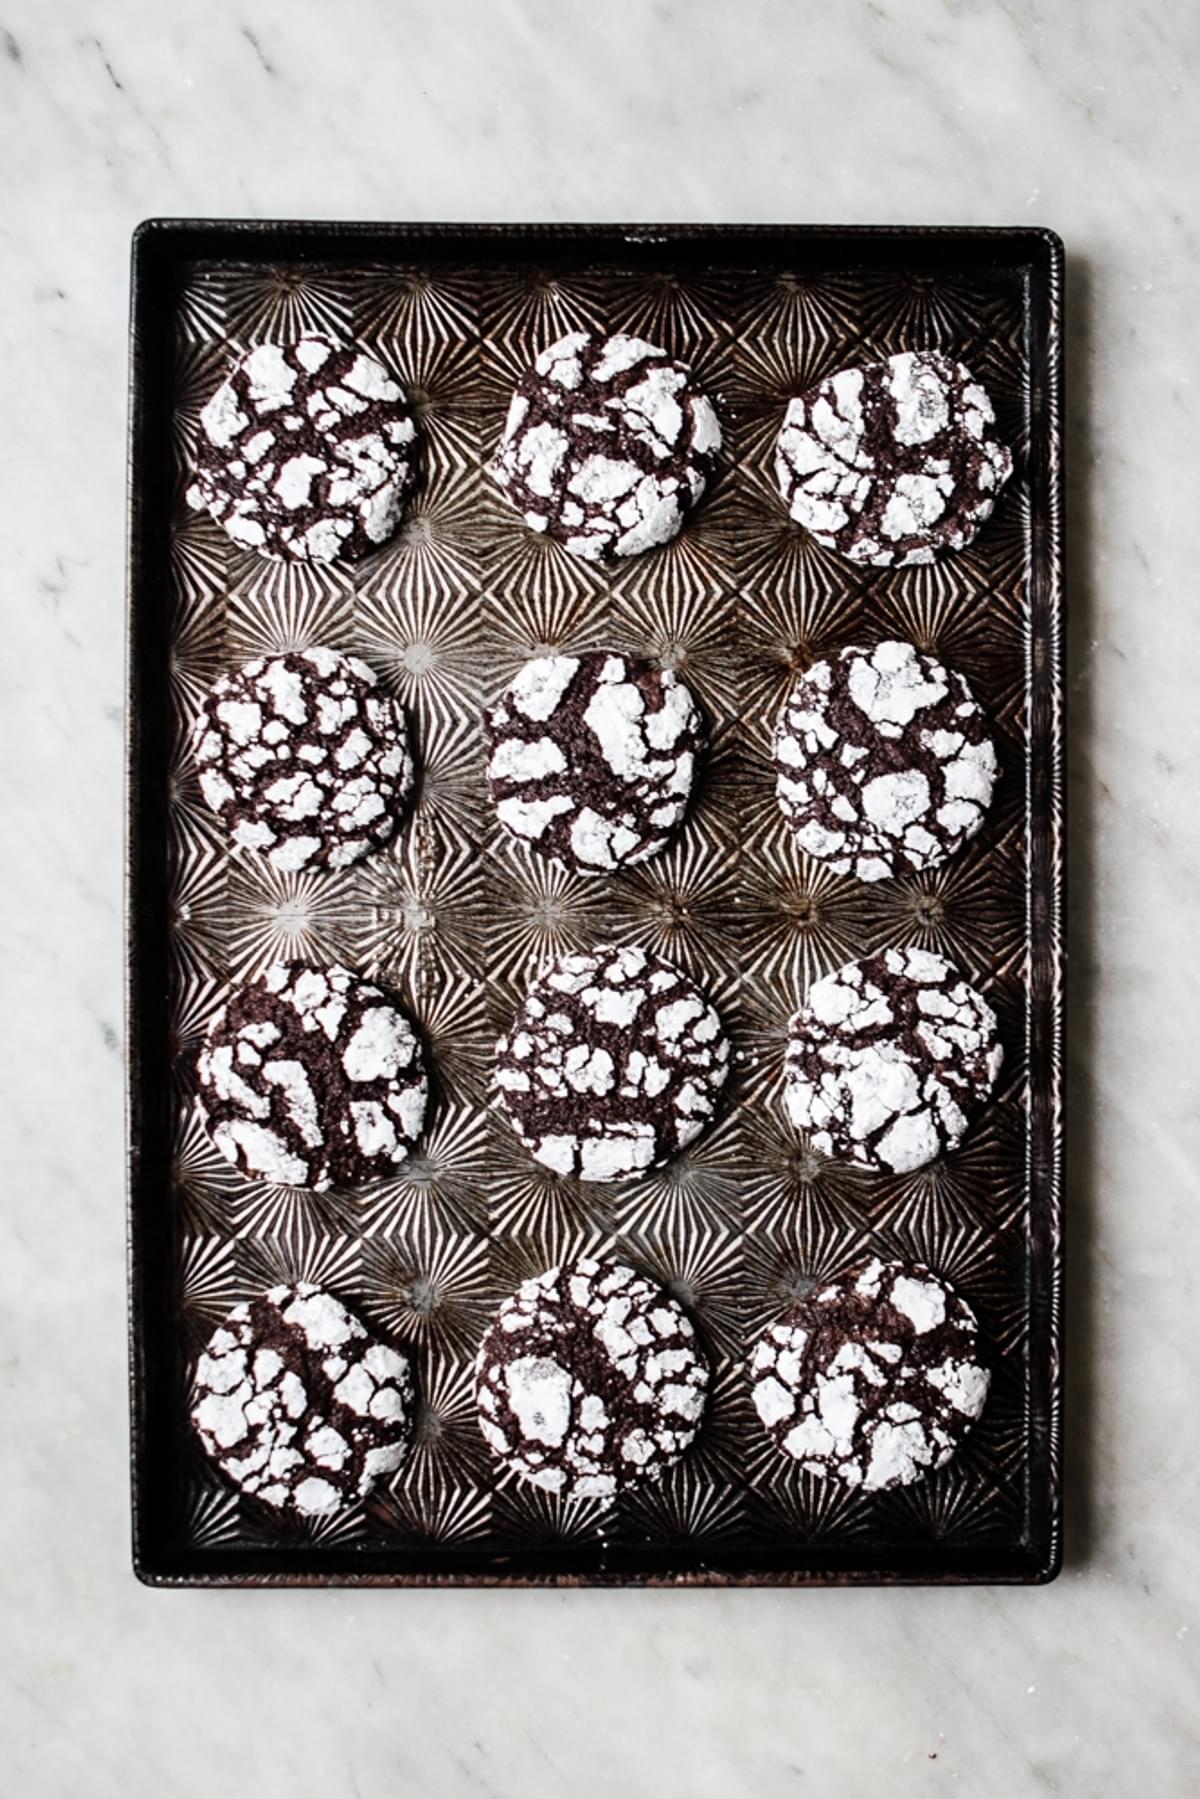 chocolate crinkle cookies rolled in powdered sugar baked on a cookie sheet